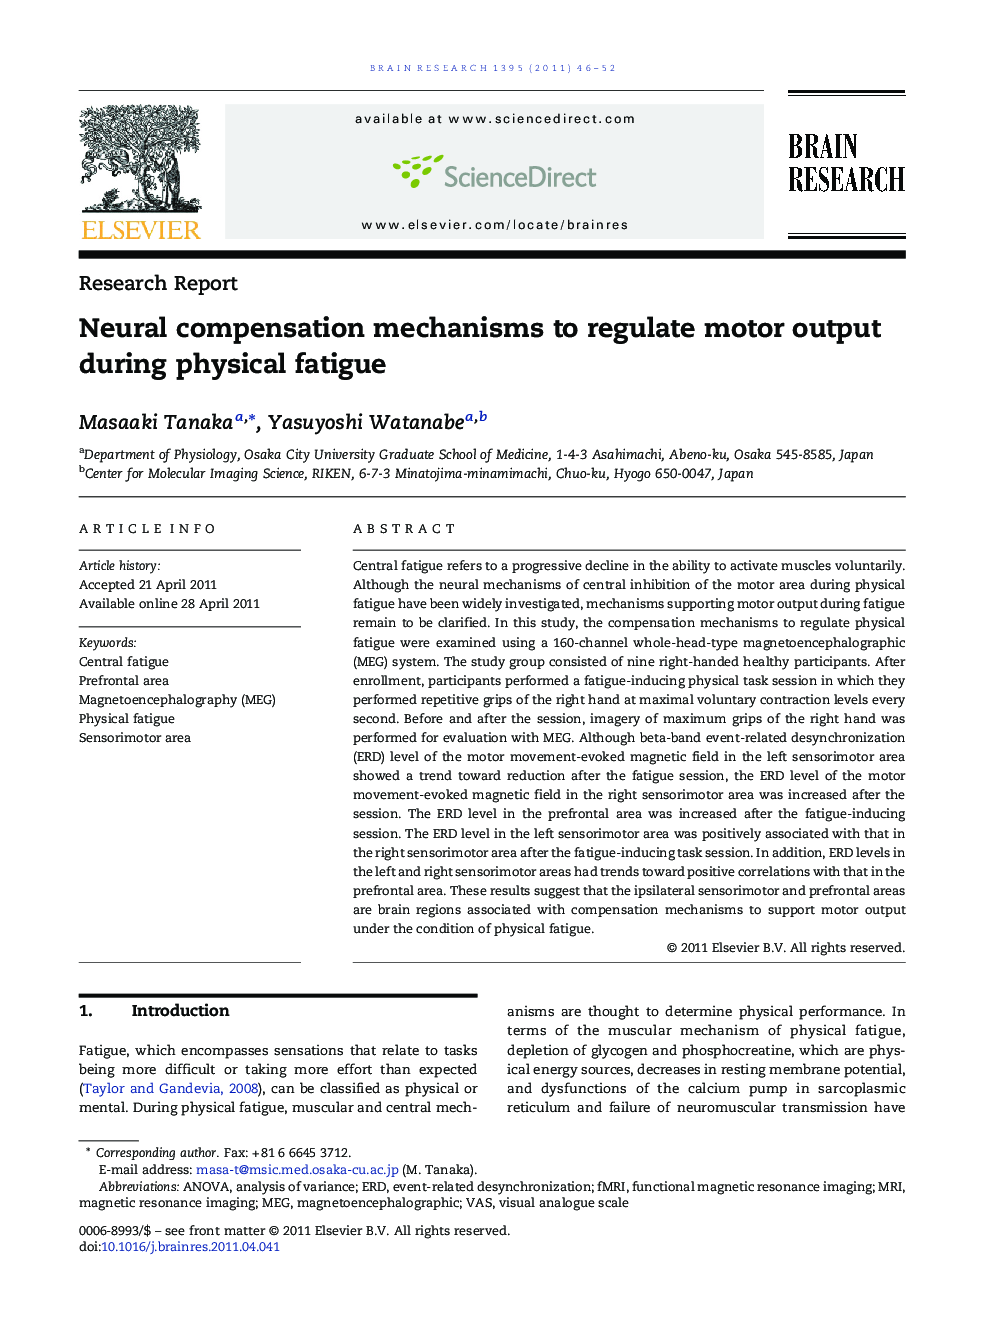 Neural compensation mechanisms to regulate motor output during physical fatigue